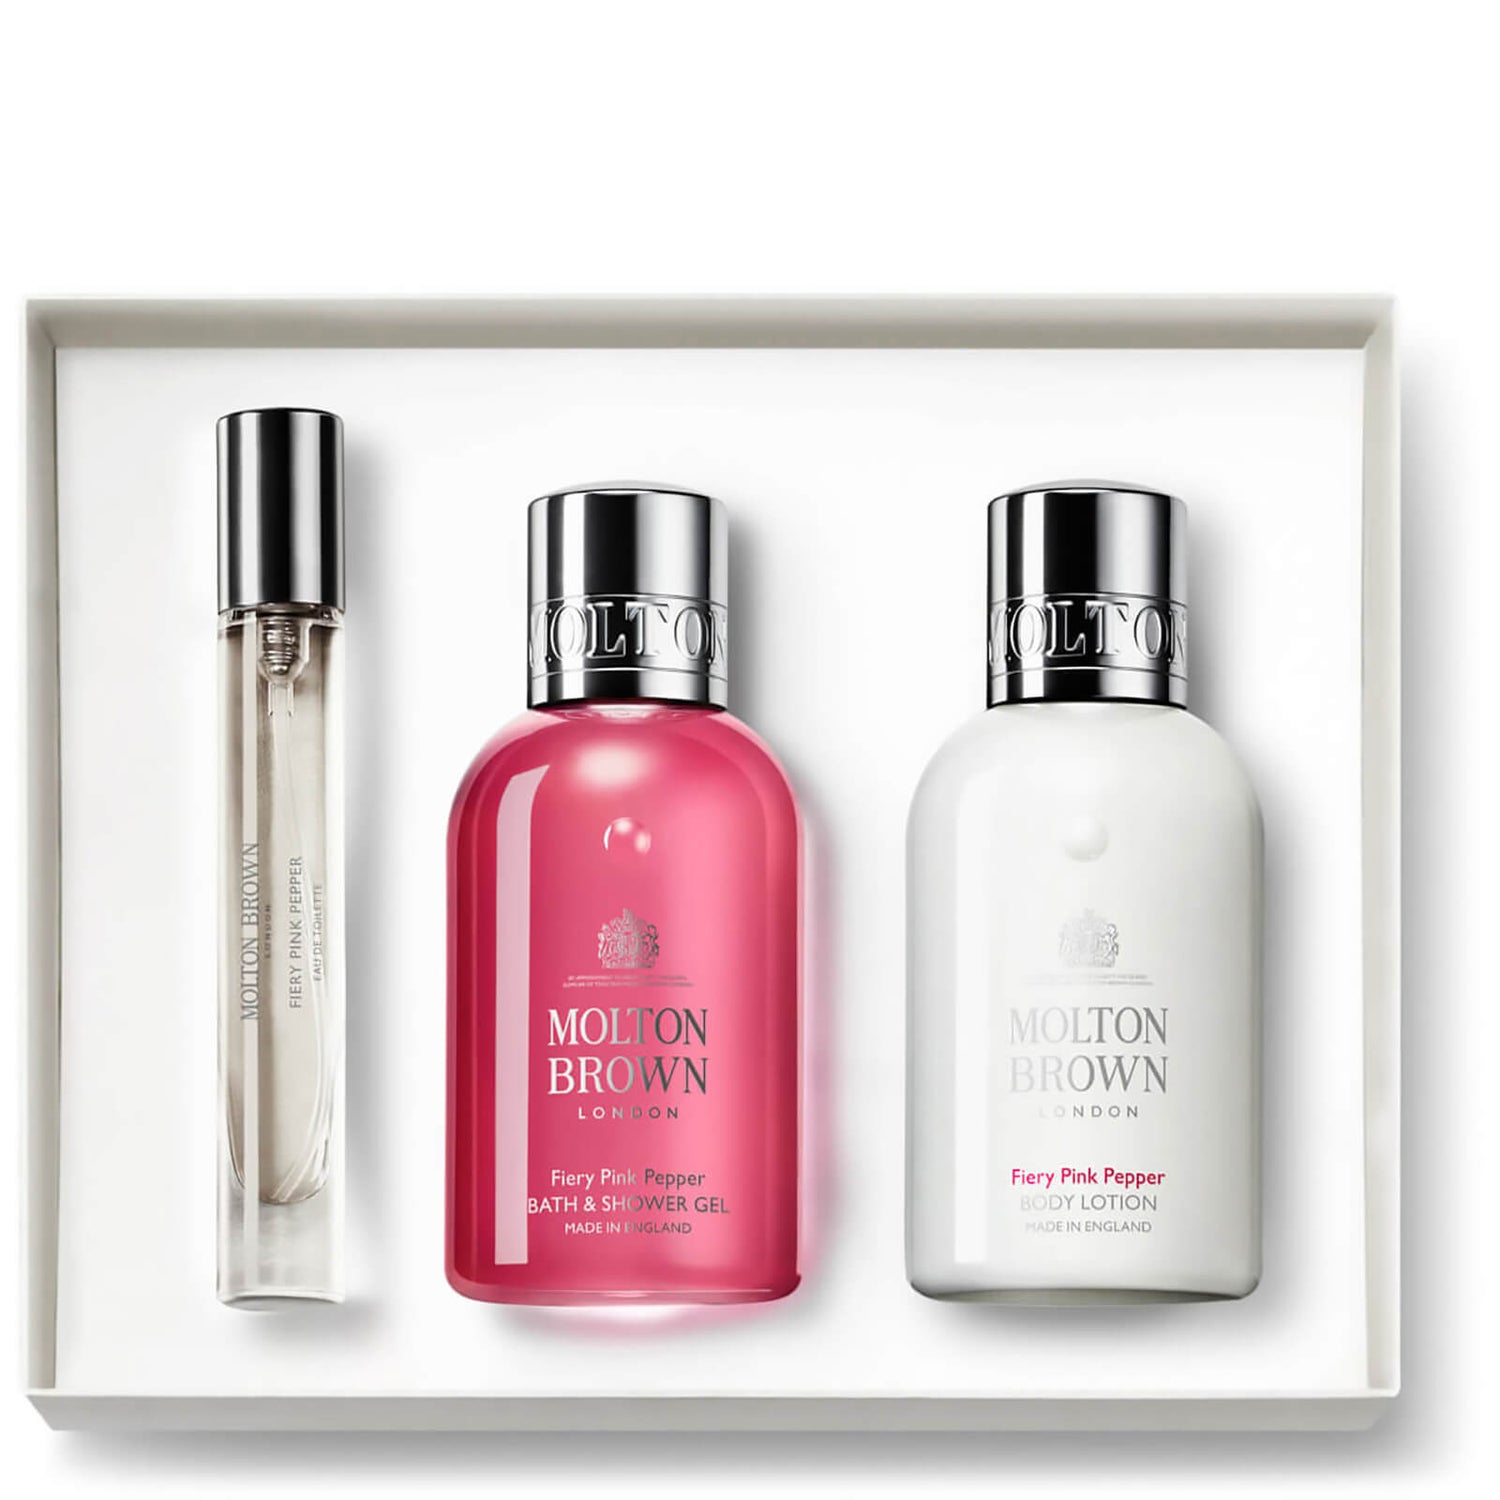 Molton Brown Fiery Pink Pepper Fragrance Set